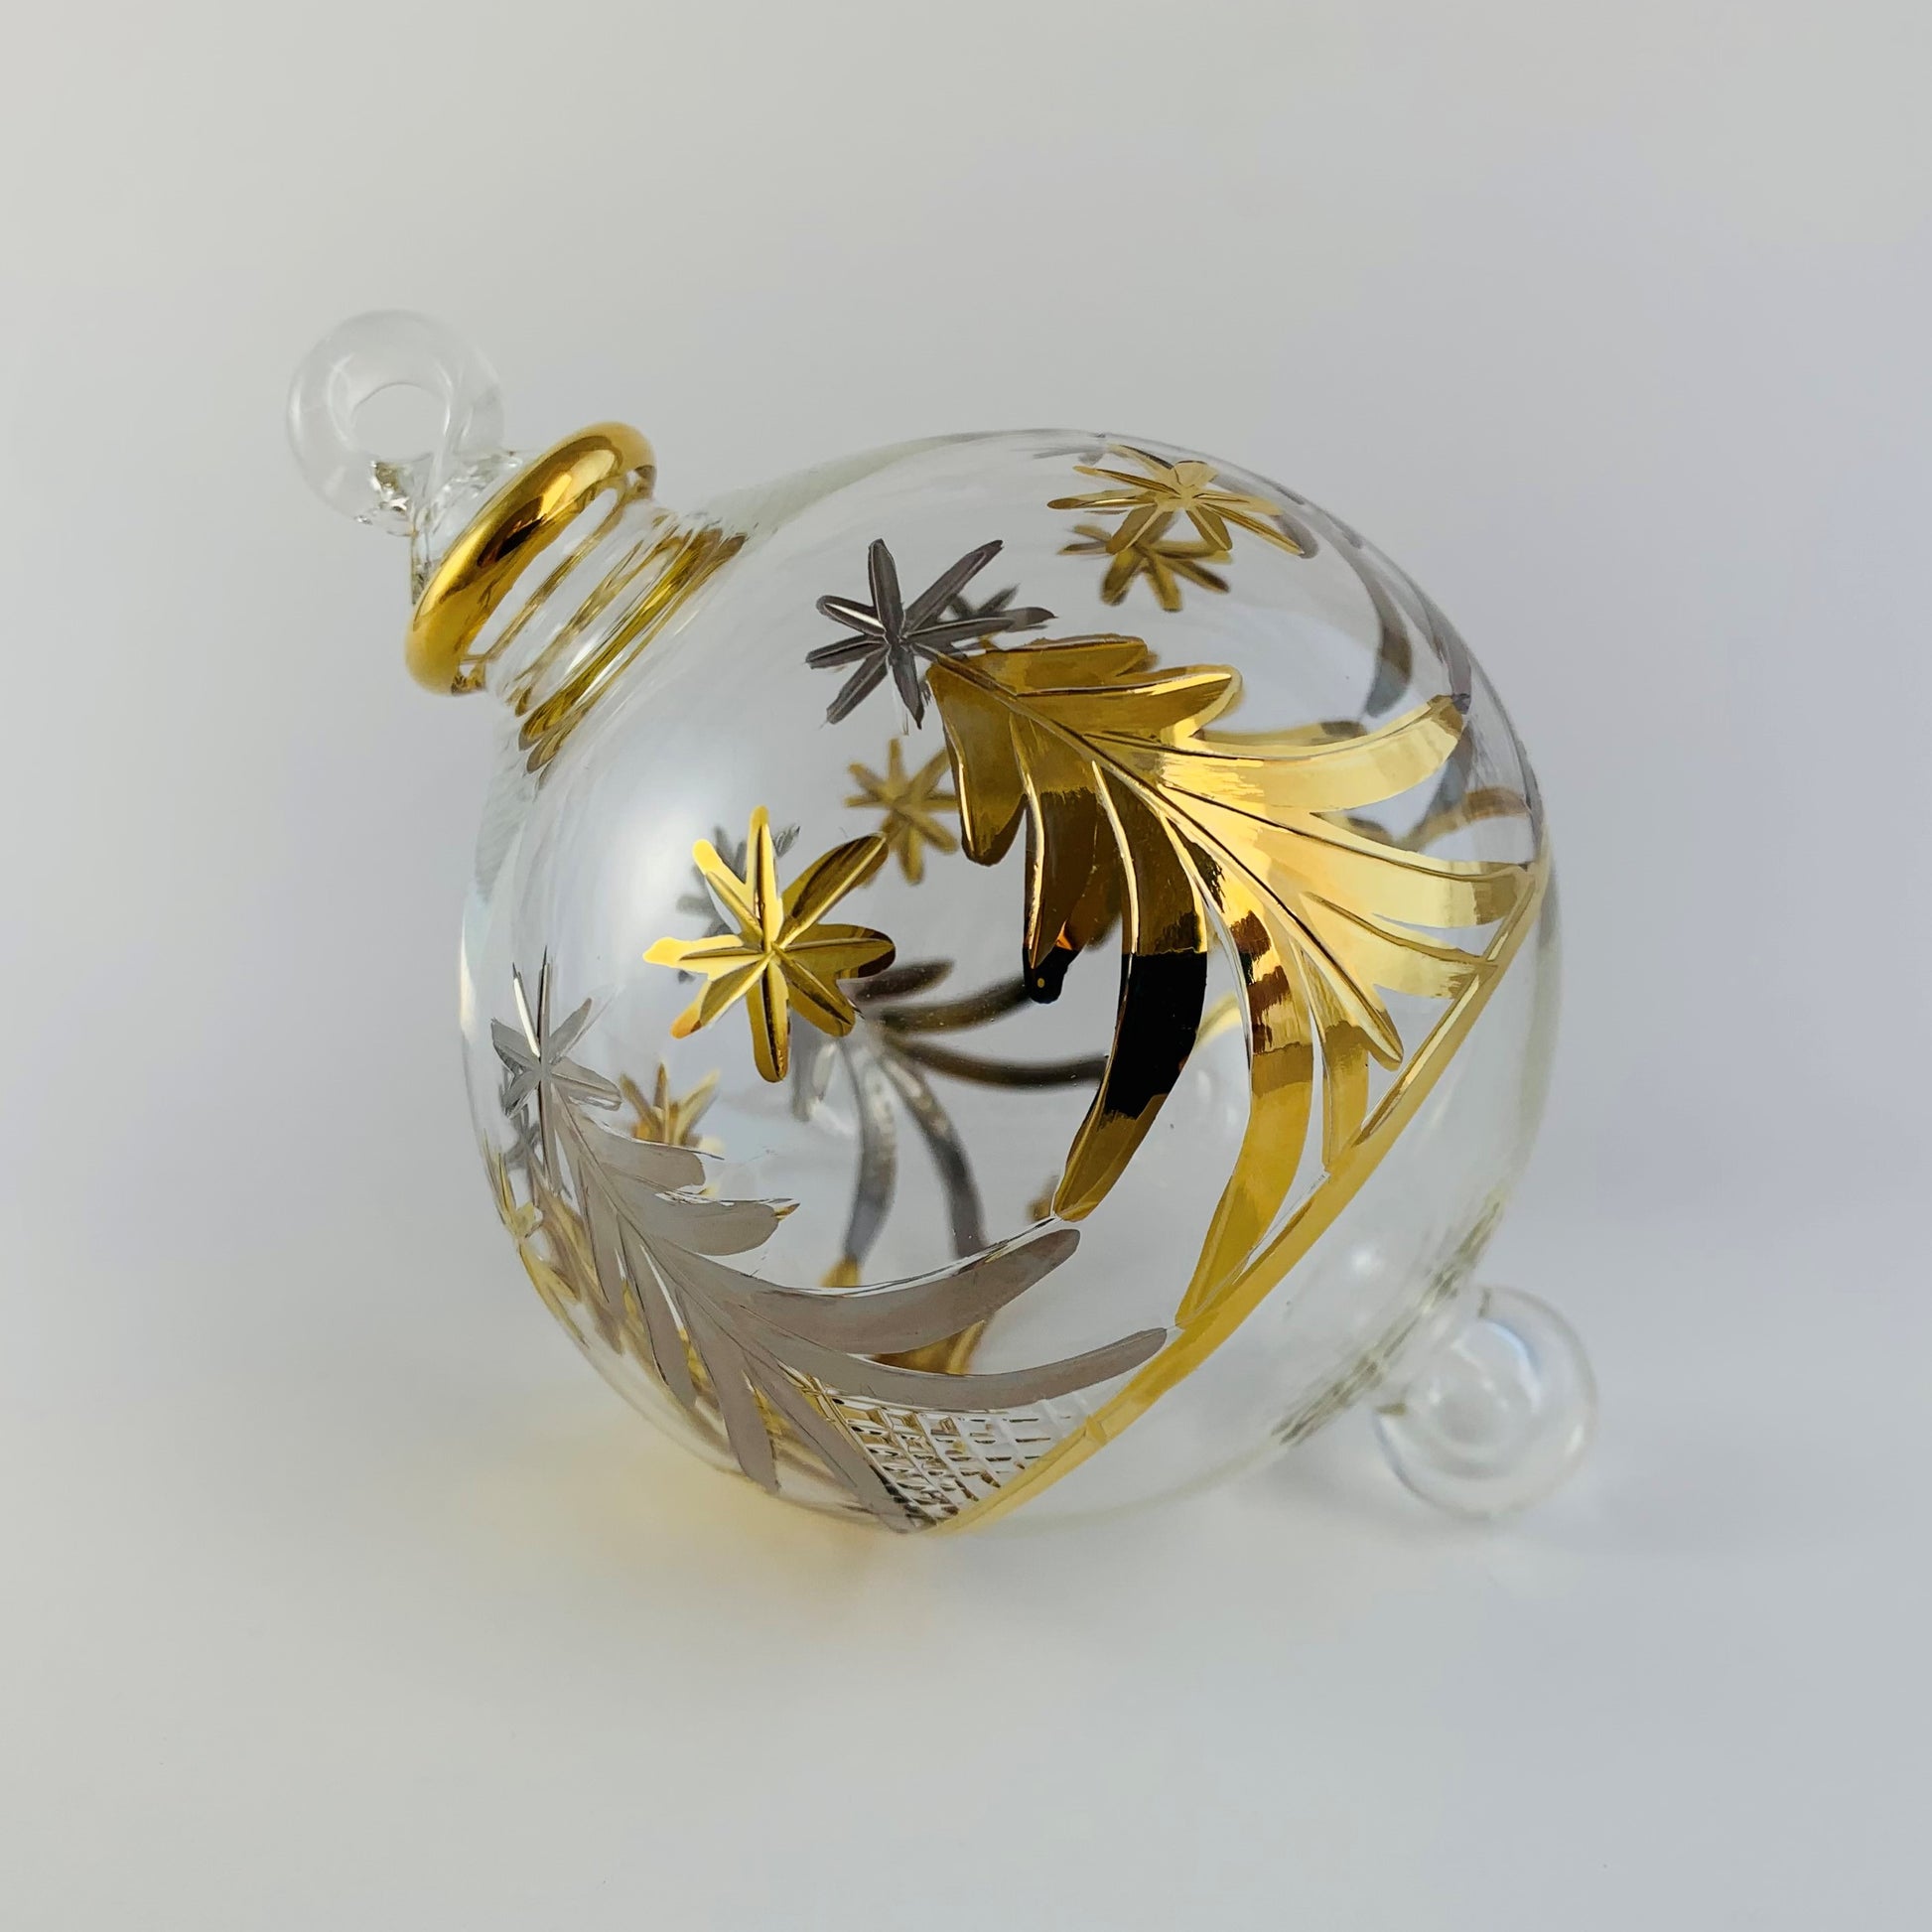 Blown Glass Ornament - Christmas Silver & Gold